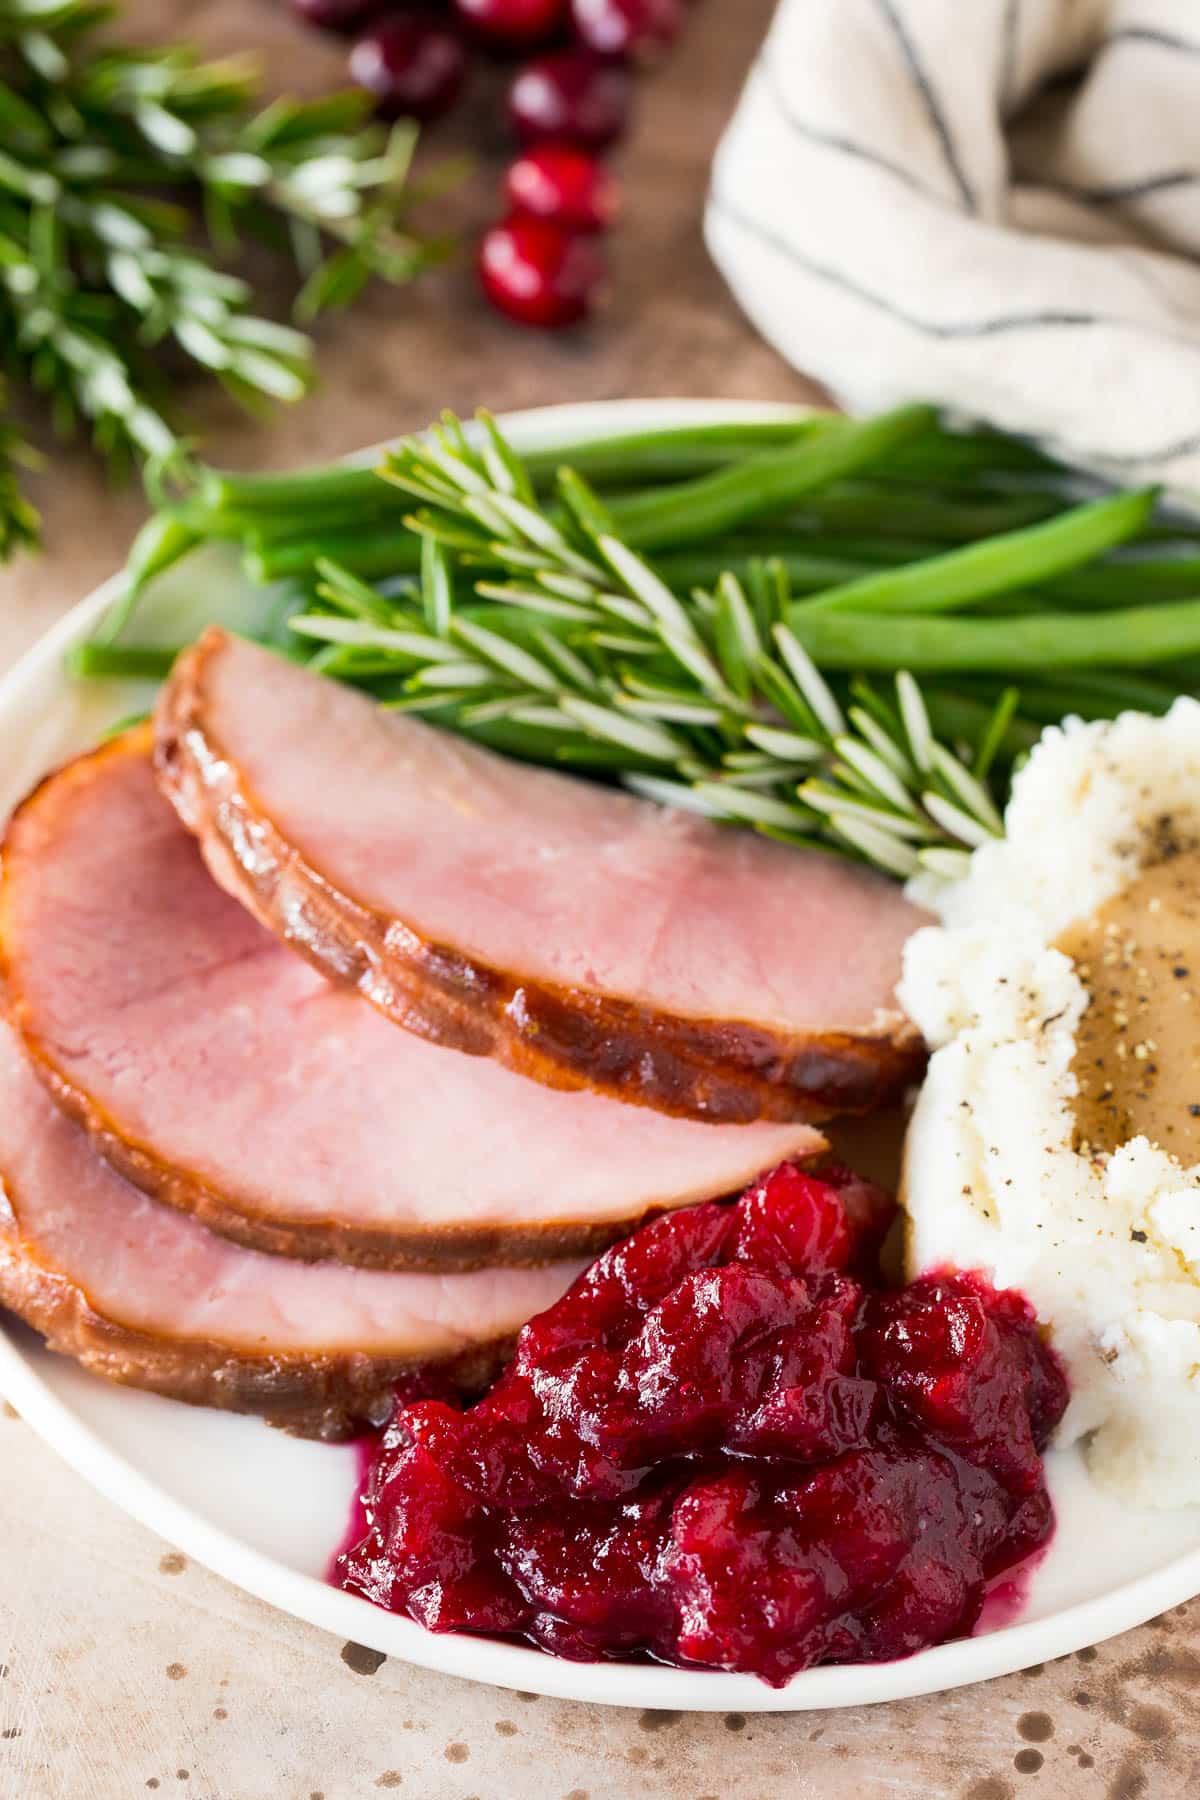 Instant Pot cranberry sauce on a plate with ham and green beans.